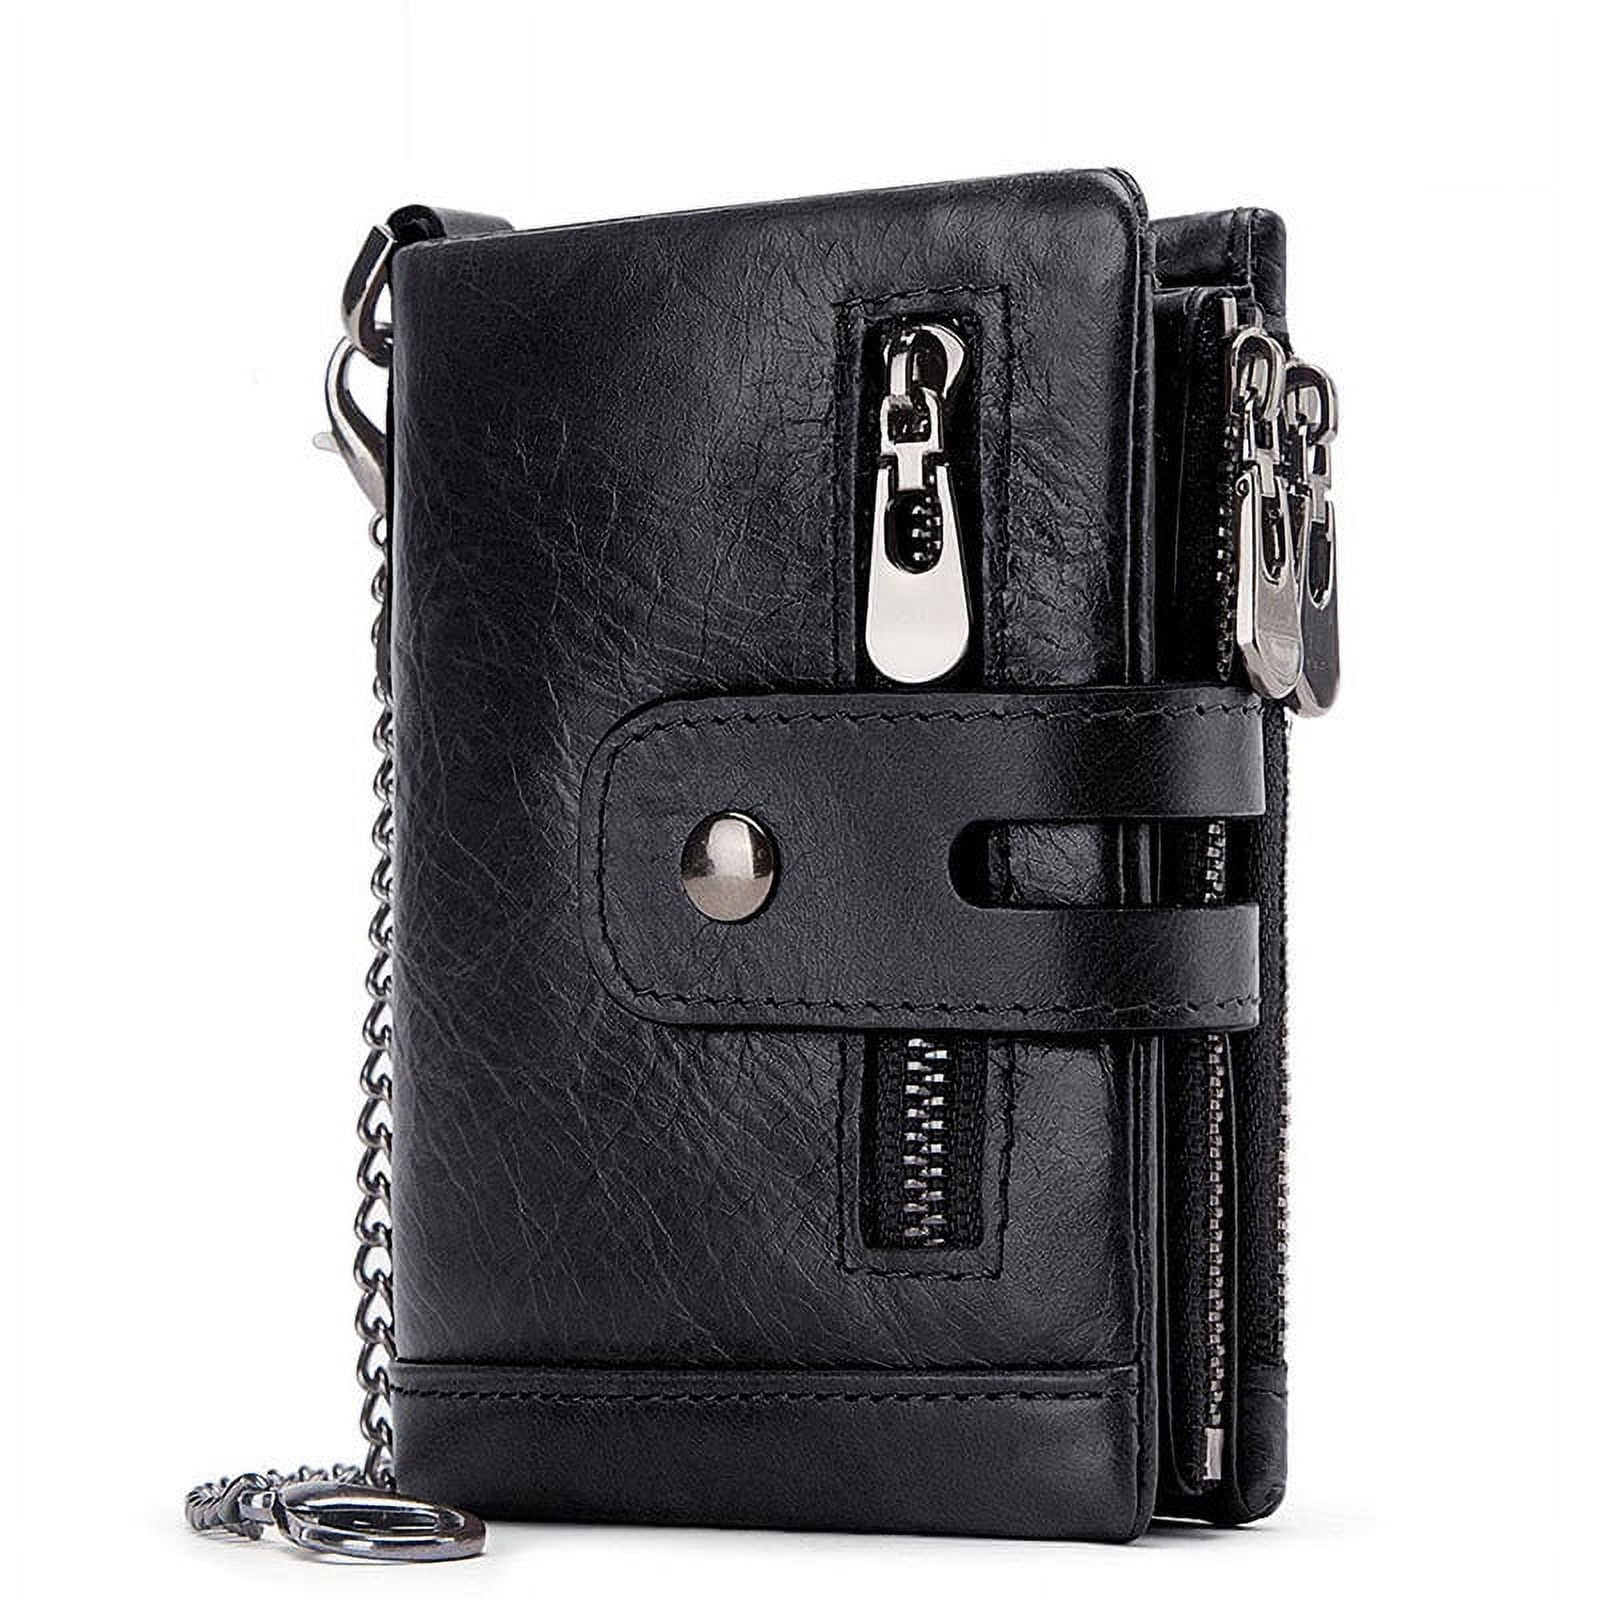 Mens Leather Wallet RFID Blocking Credit Card Holder Double Zipper Gents  Purse Black at Amazon Men's Clothing store